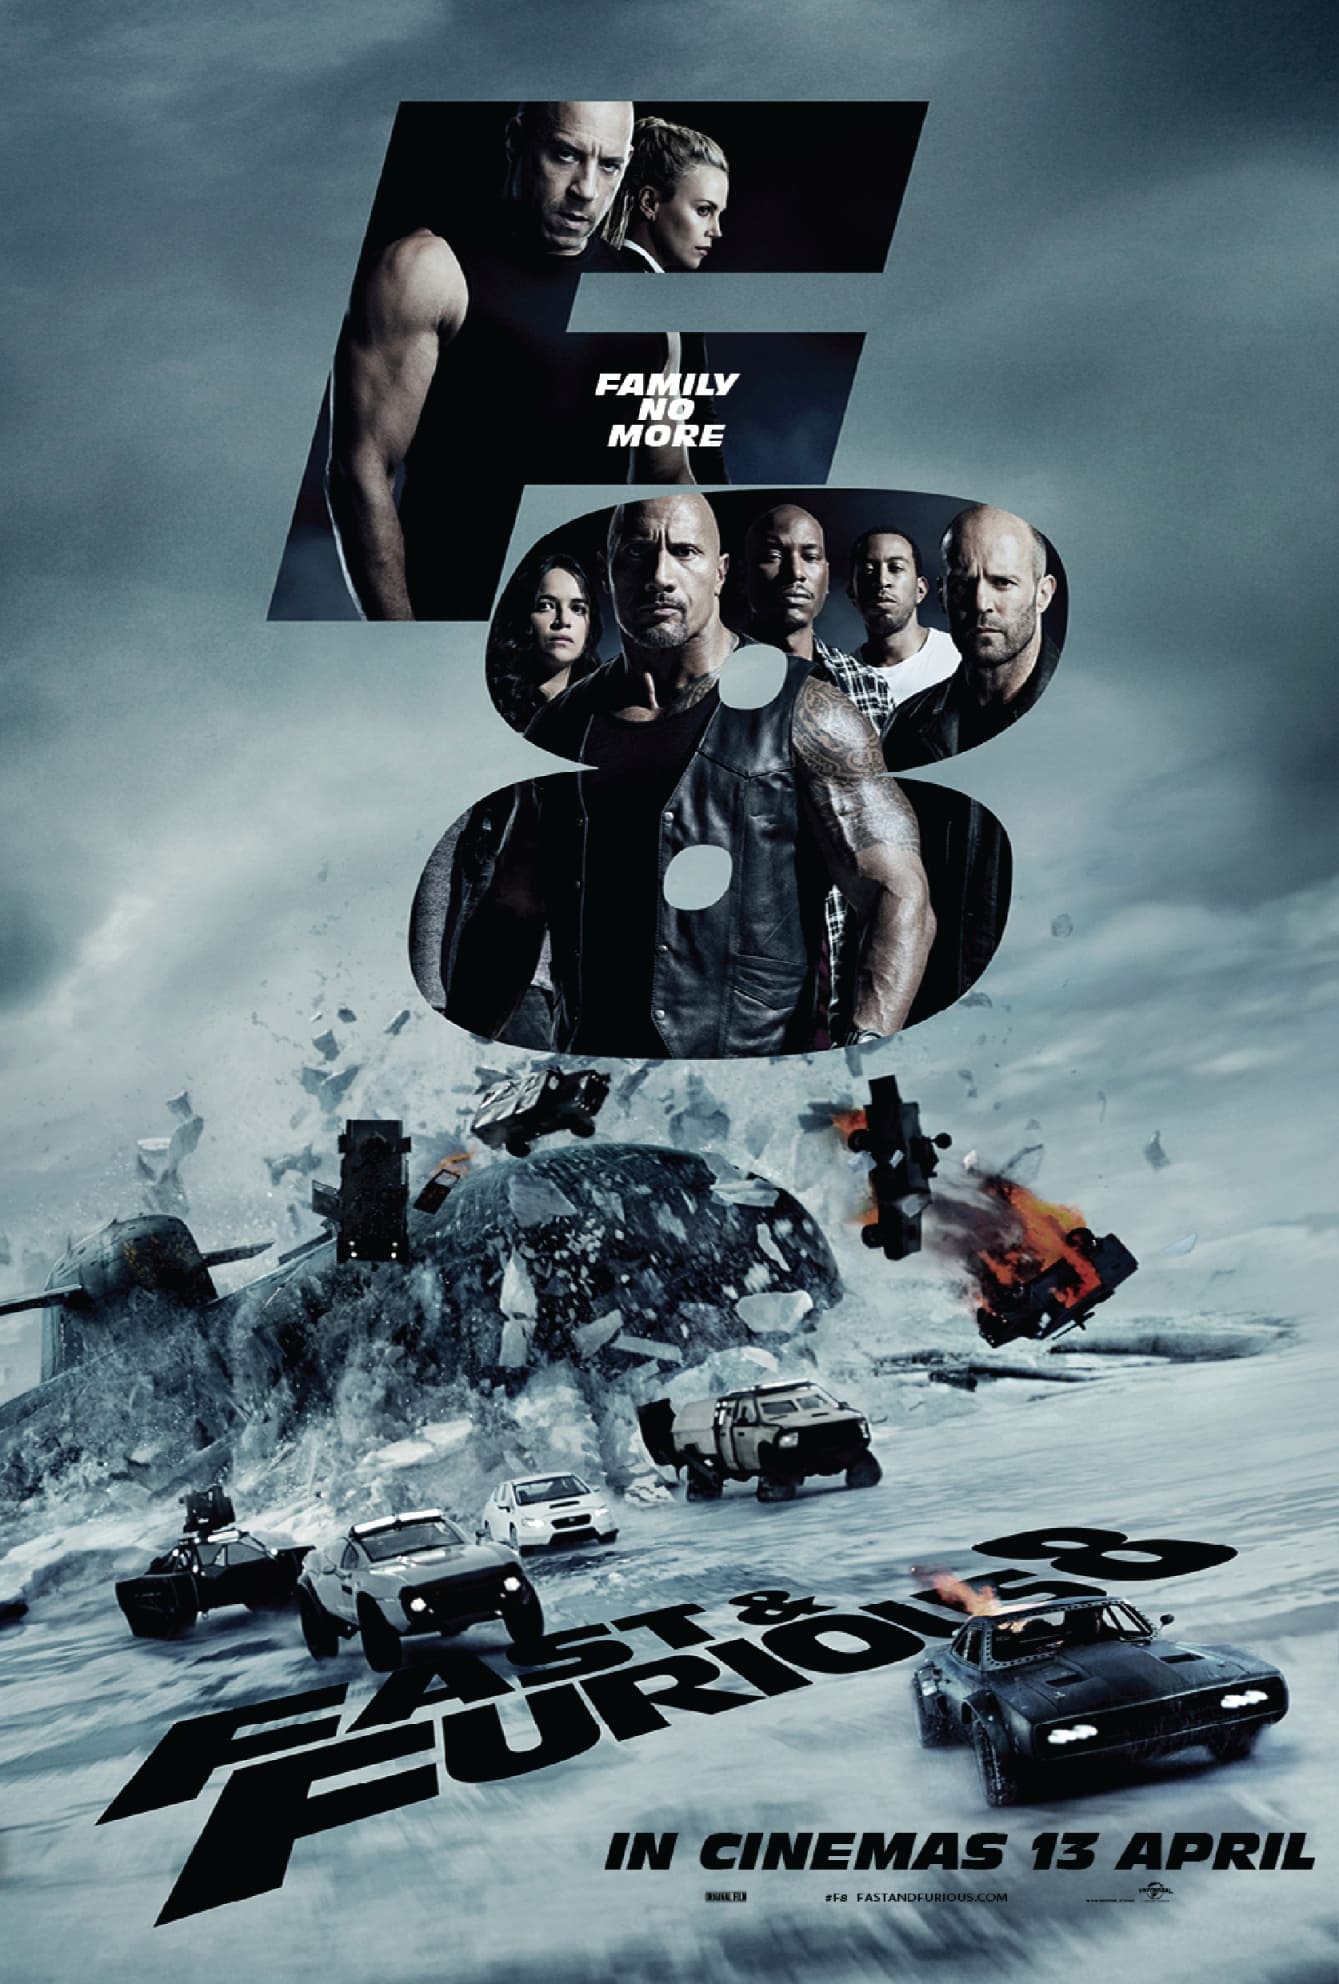 Download Fast & Furious: The Fate Of The Furious (2017) (Dual Audio) Blu-Ray Movie In 480p [400 MB] | 720p [1.3 GB] | 1080p [4.2 GB]